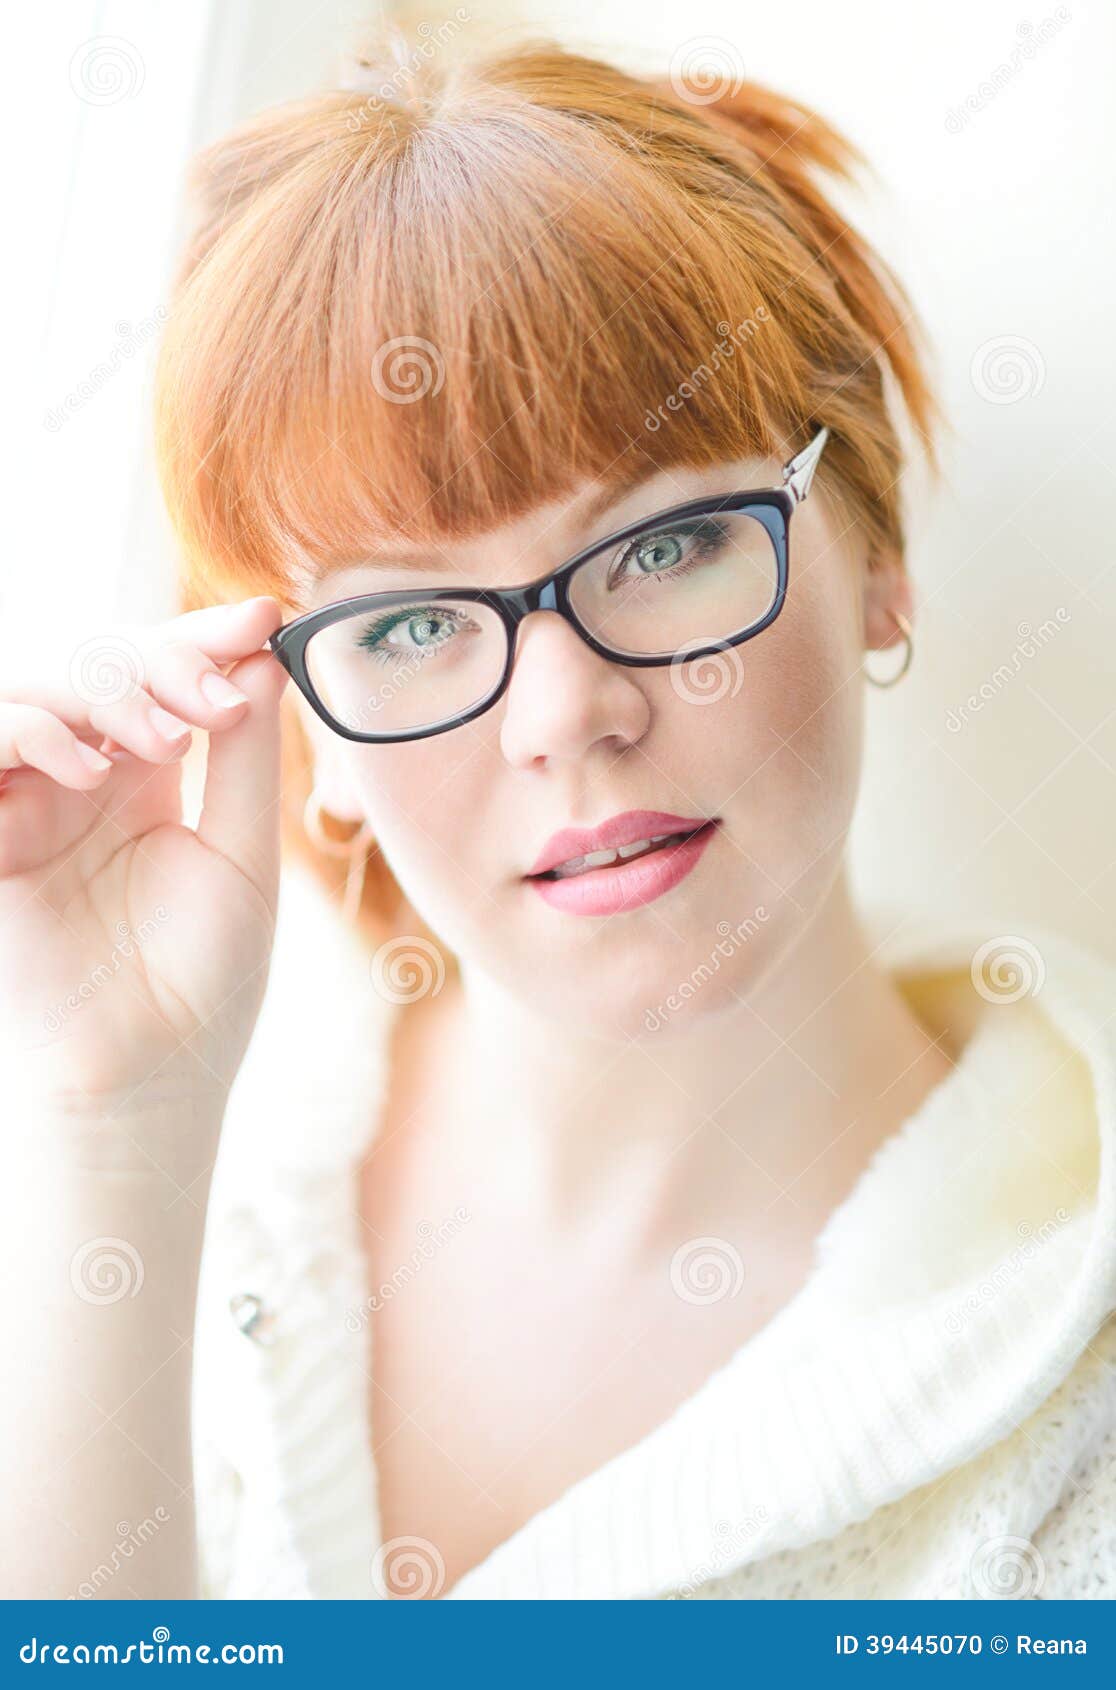 glasses Redheads in